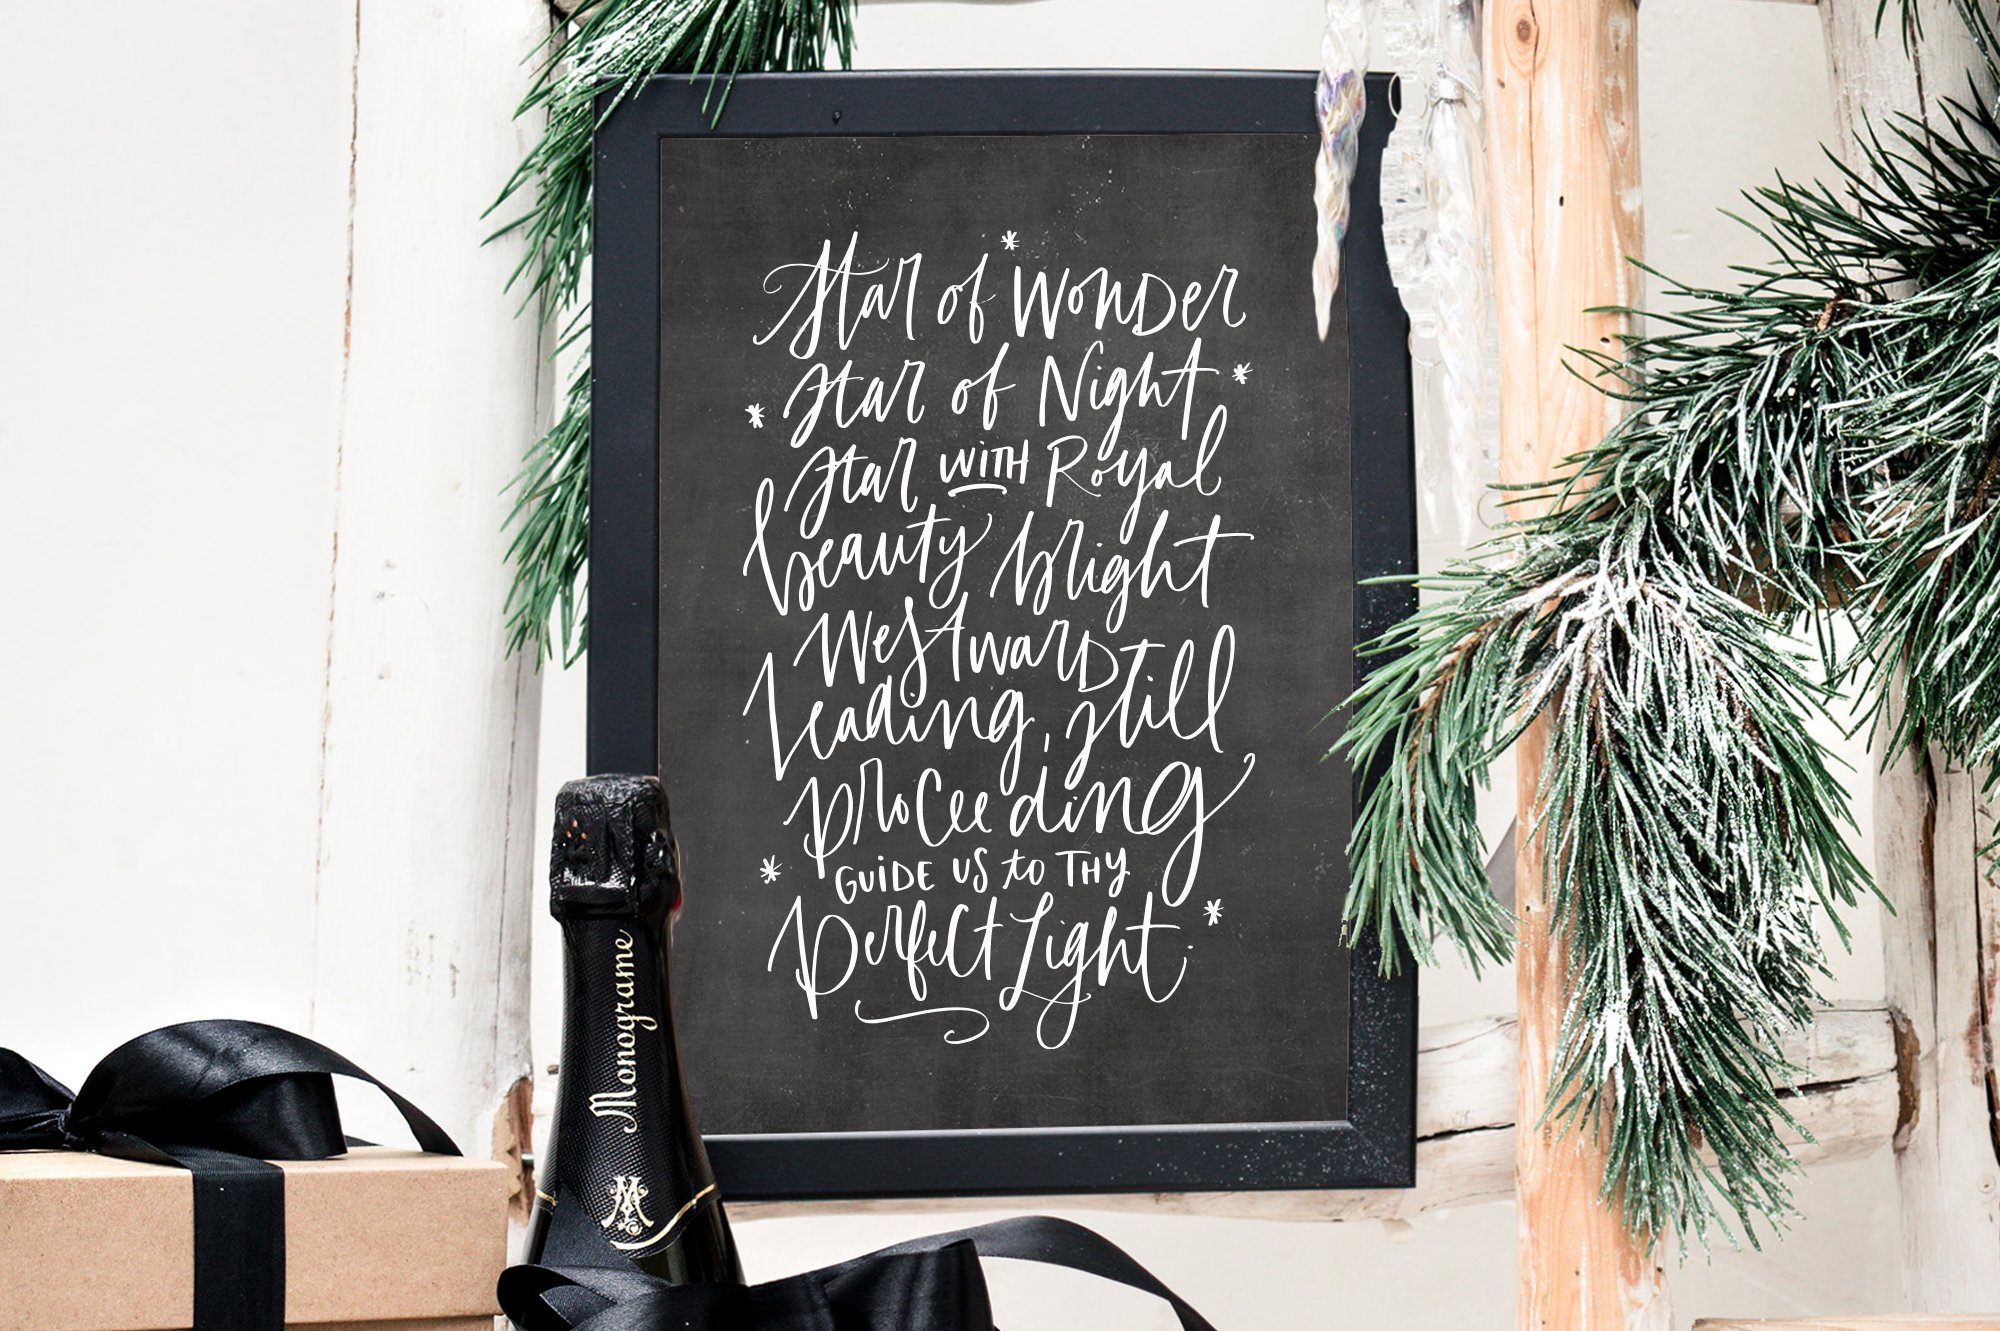 Merry & Bright Holiday Lettering Kit